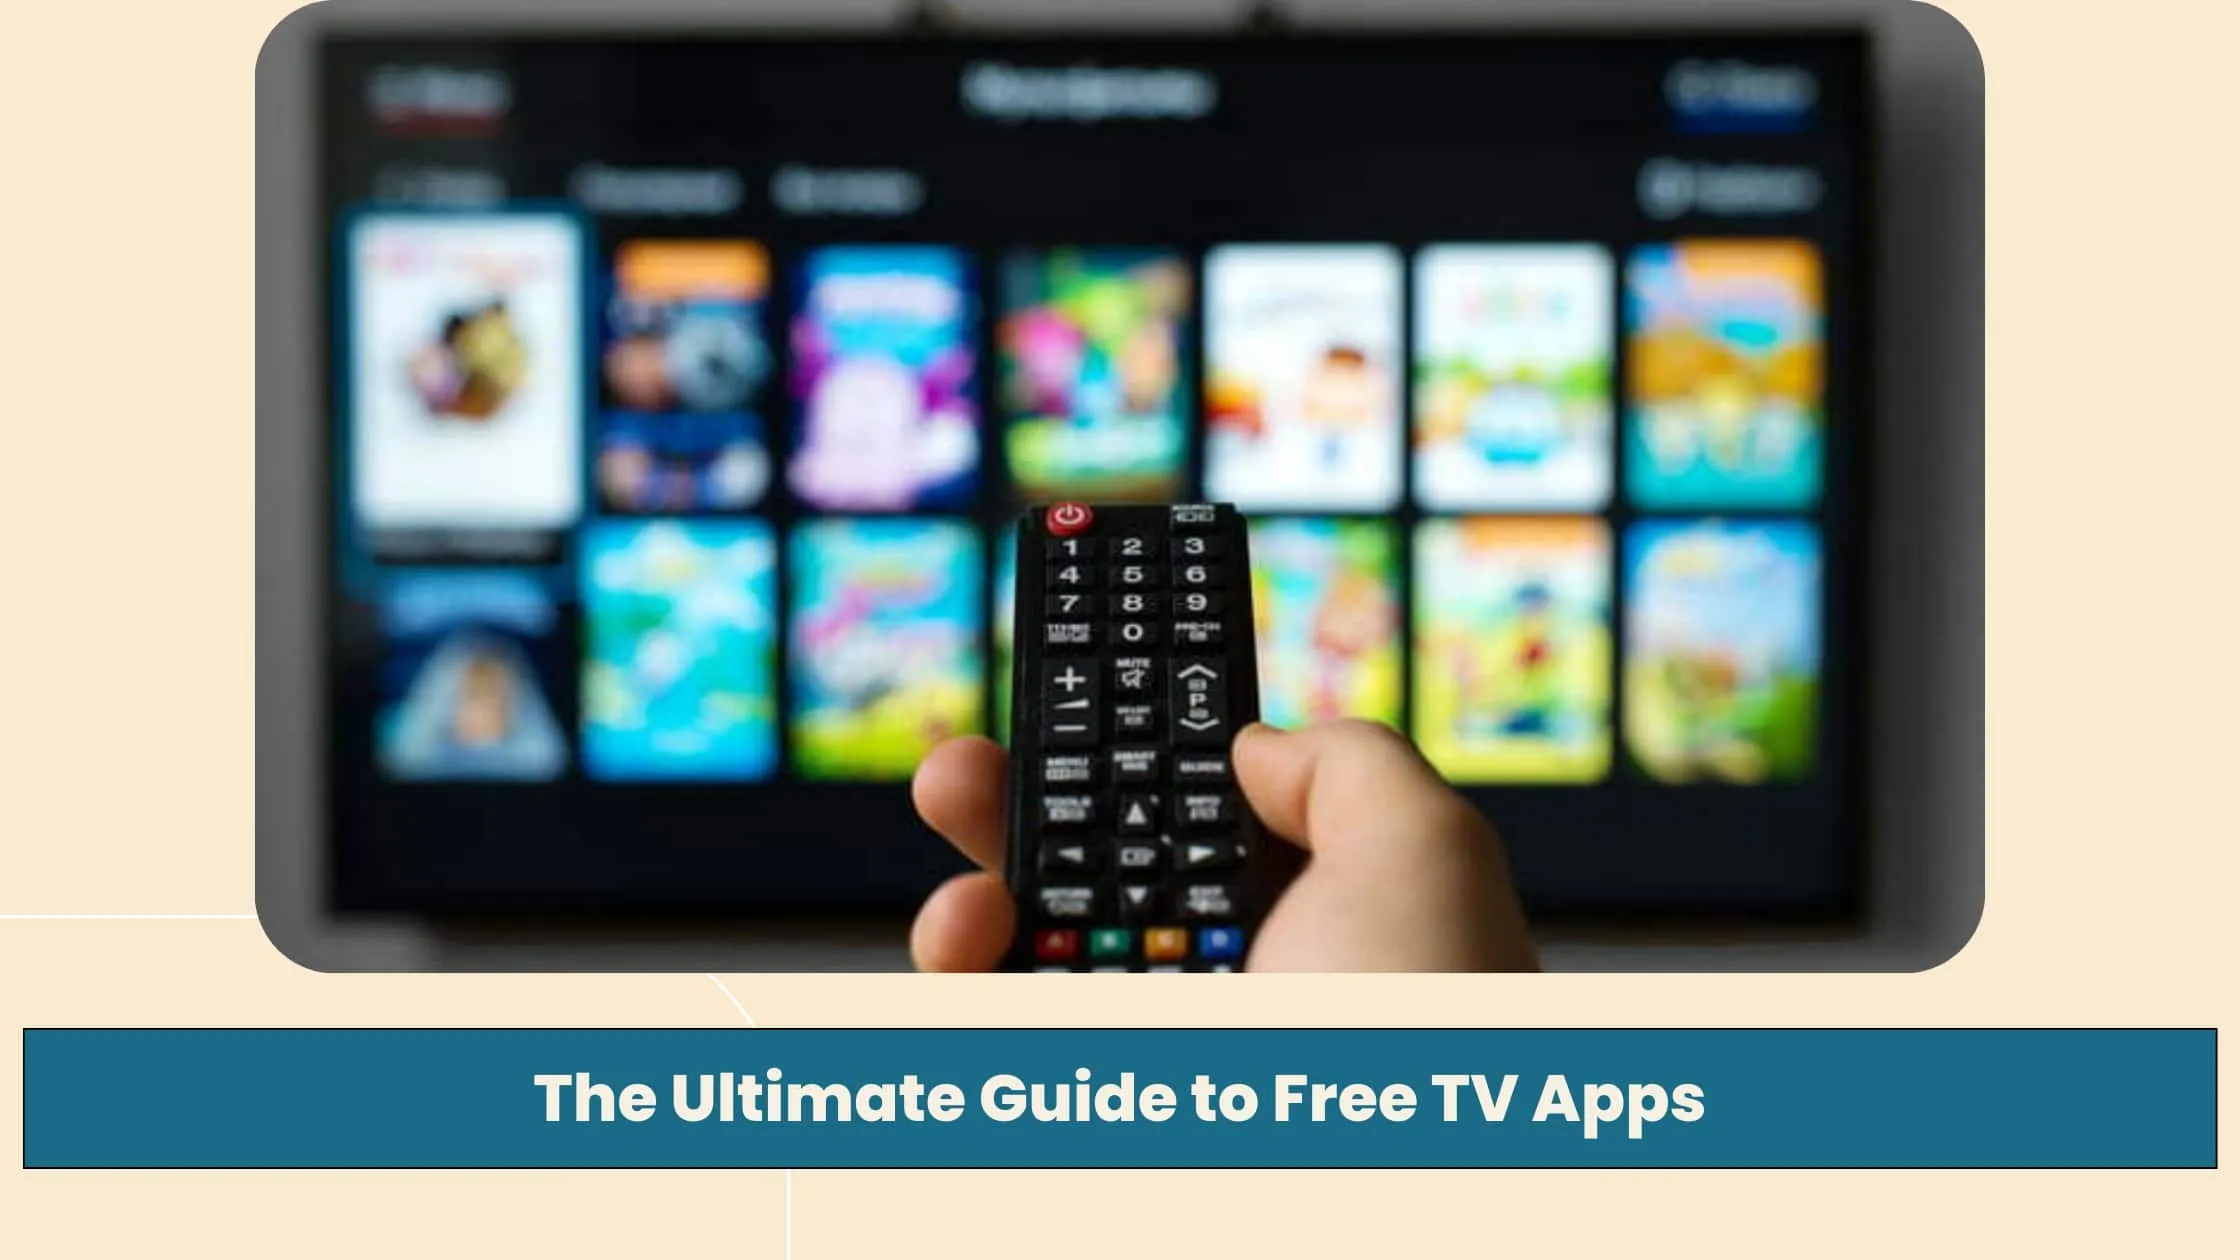 The Ultimate Guide to Free TV Apps